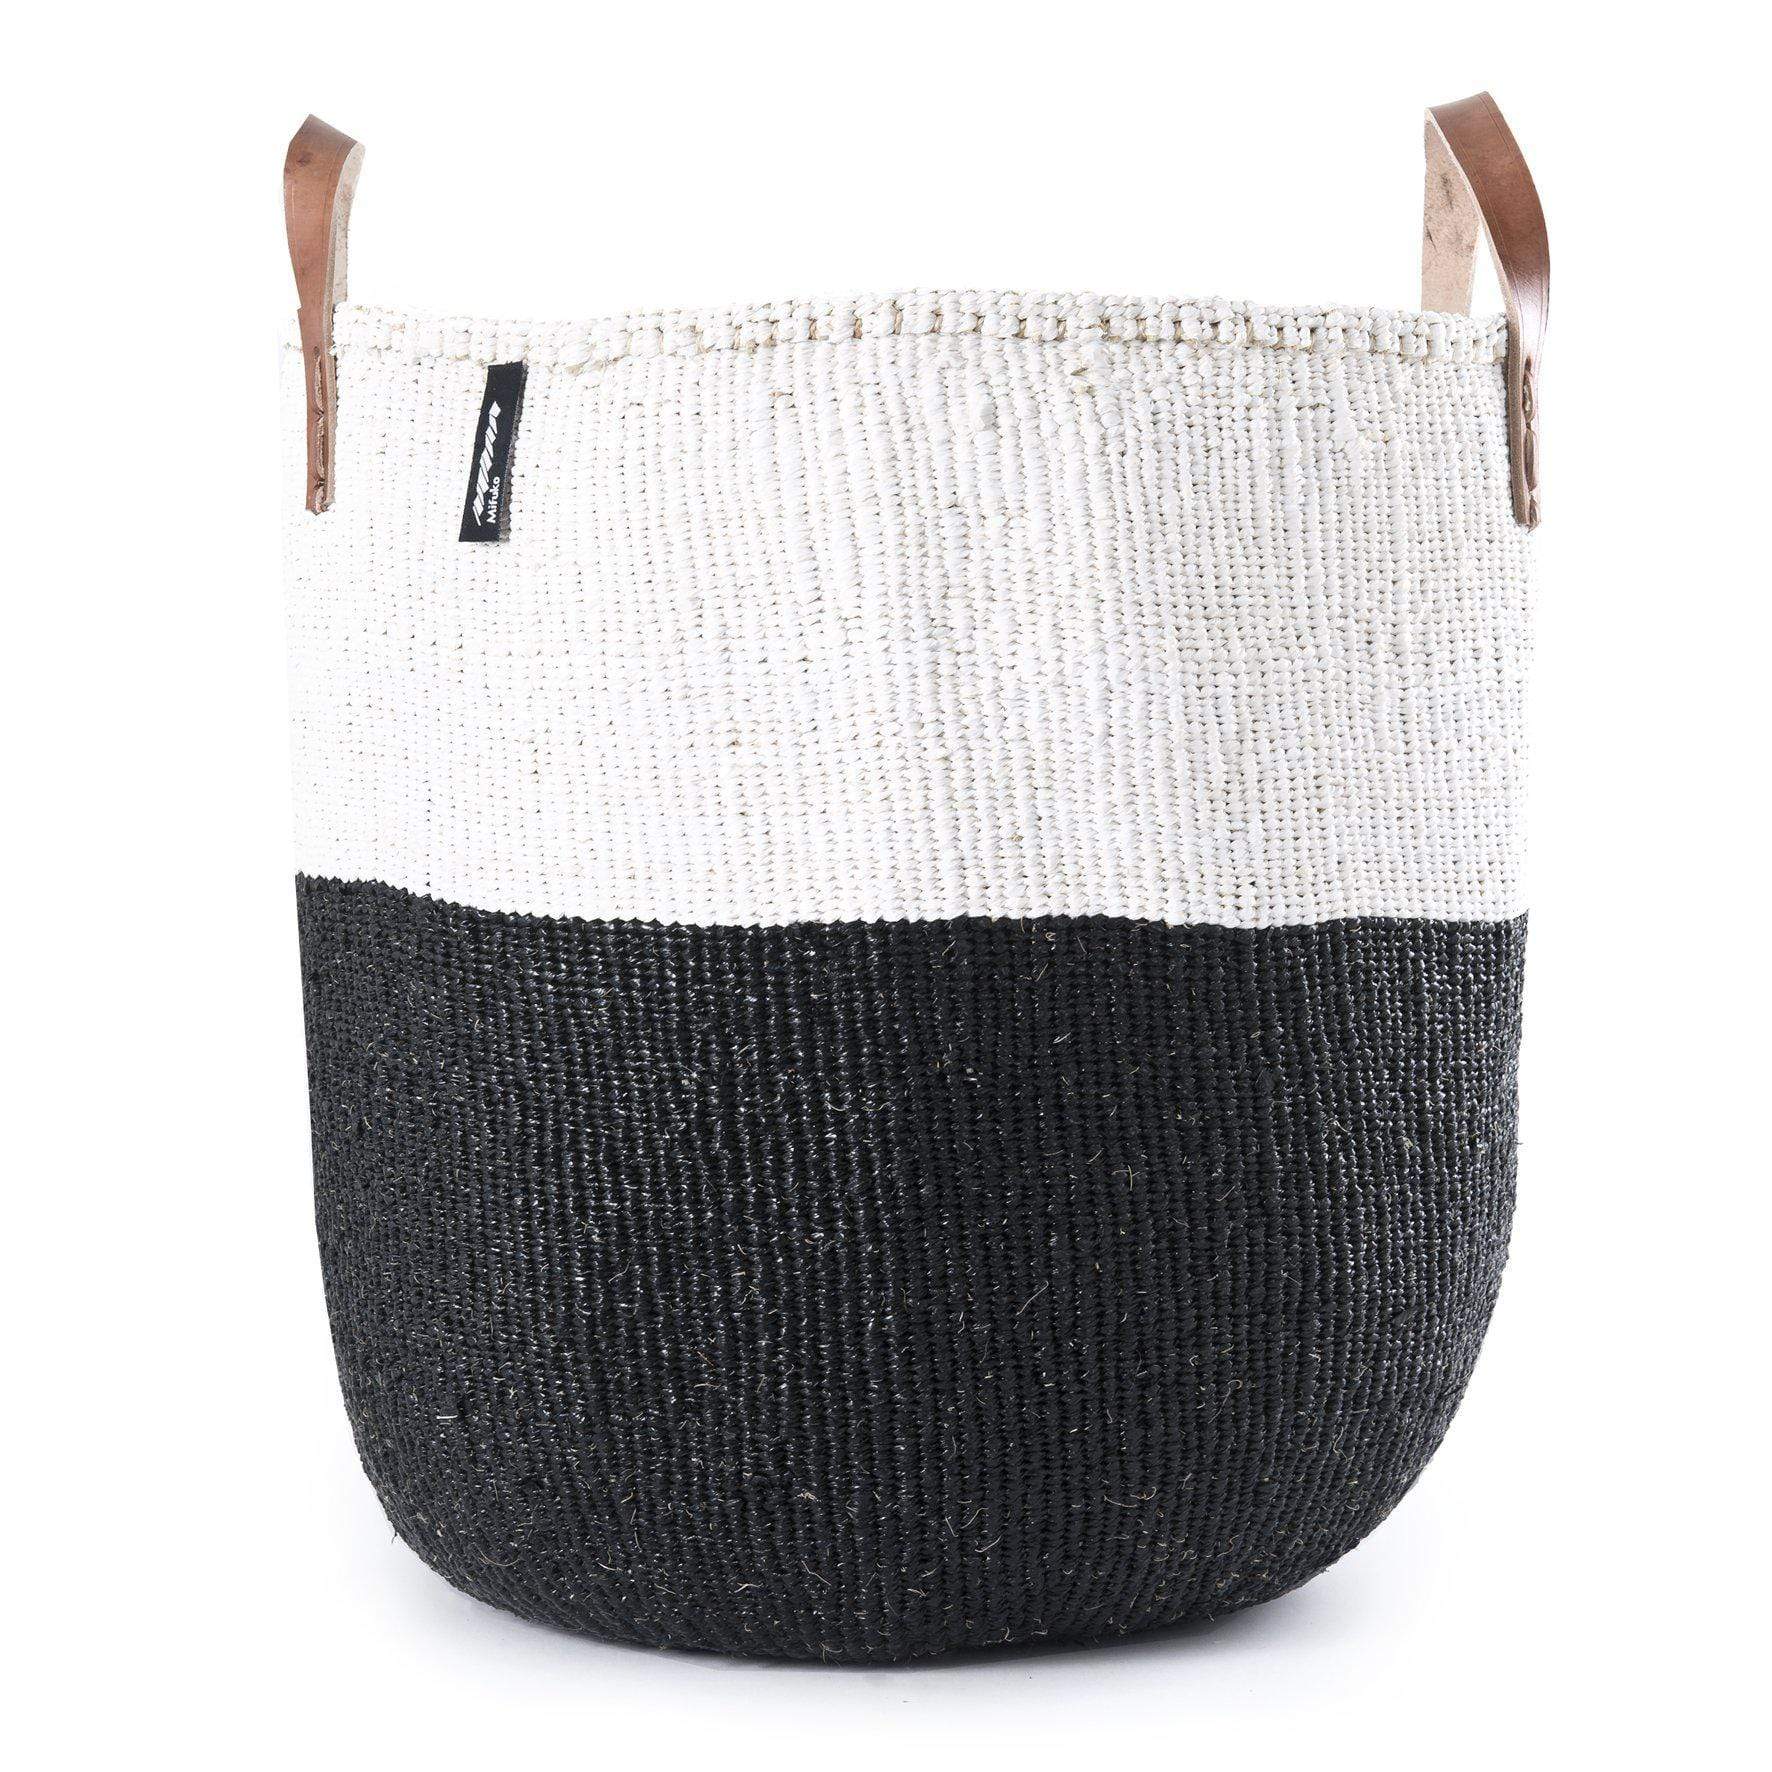 Handmade fair trade Partly recycled plastic and sisal Kiondo market basket | Black and white duo M